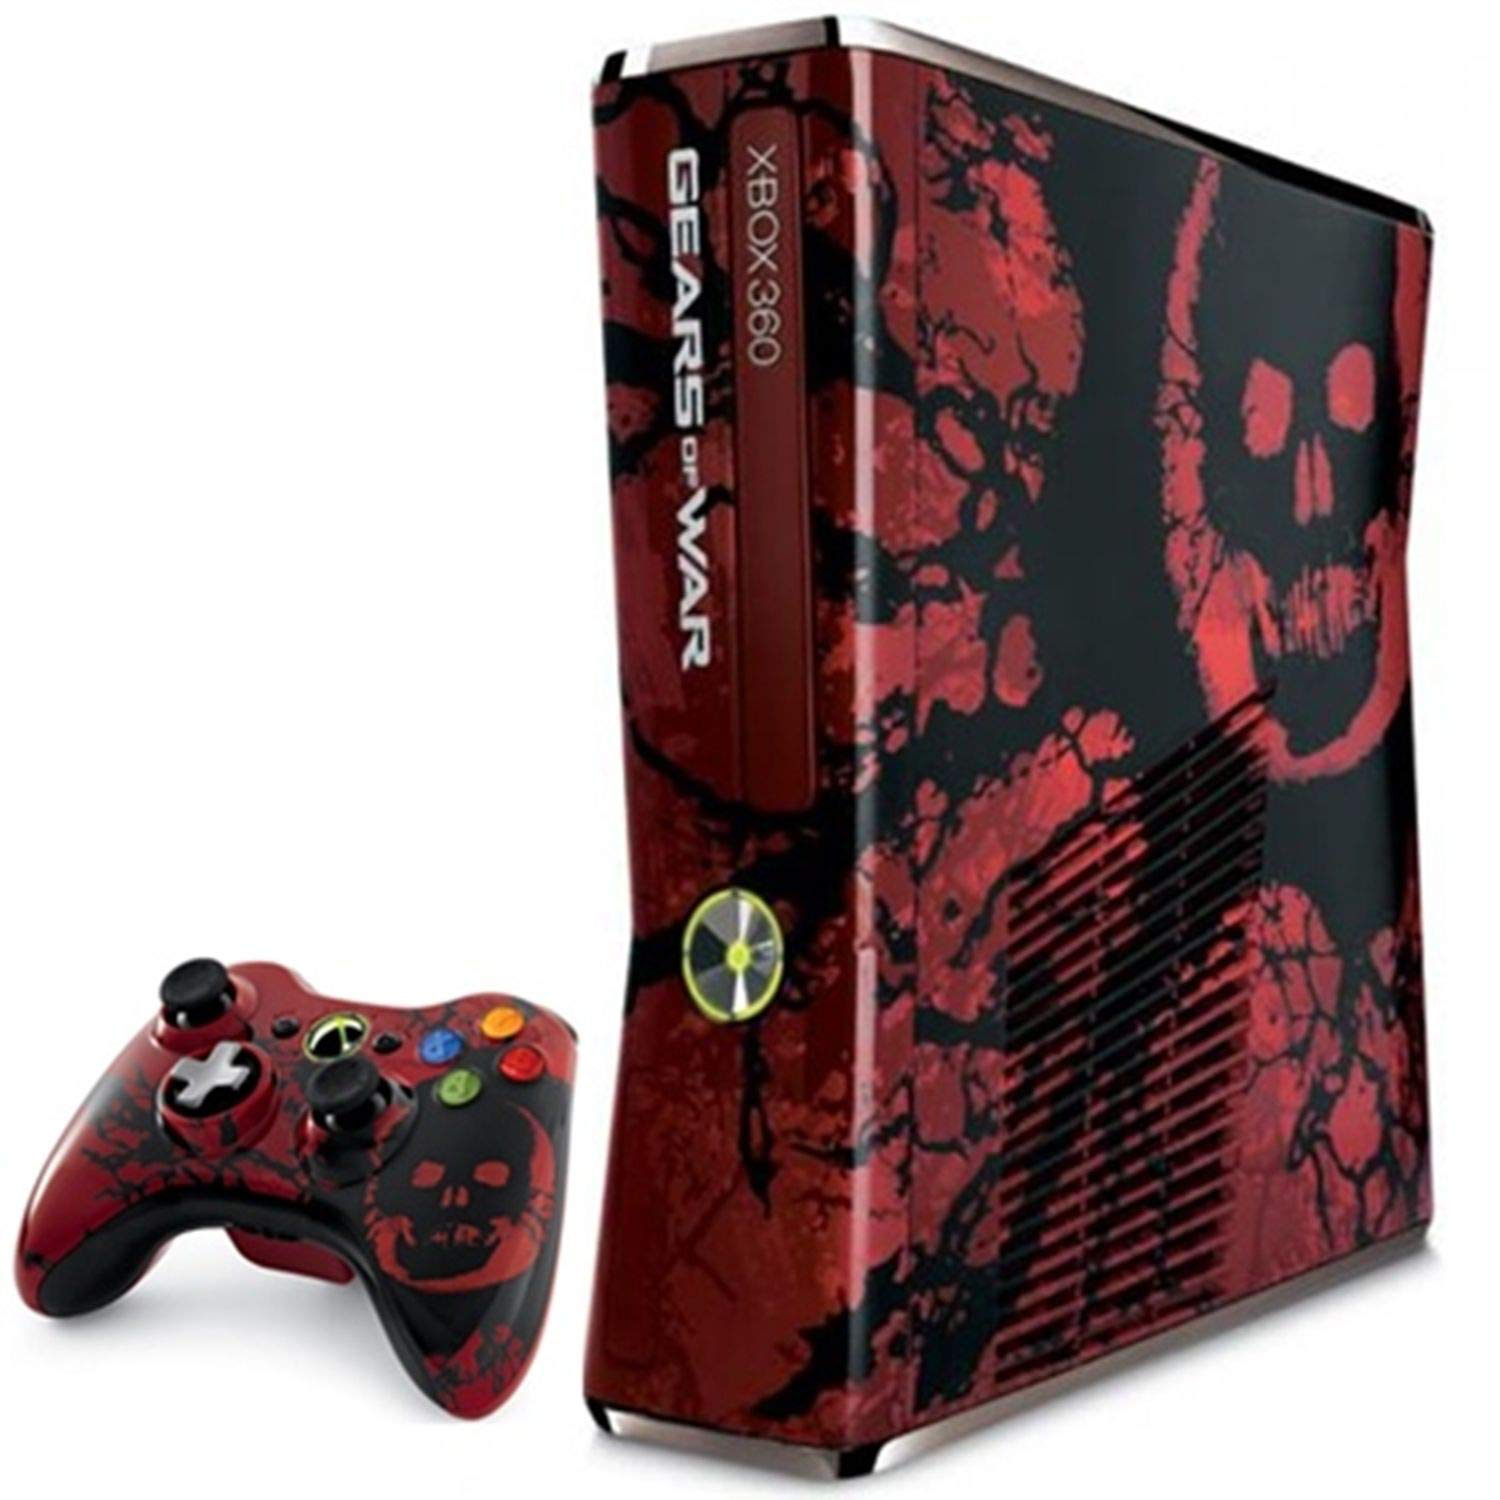 Console System | Slim Model - Gears of War 3 Edition - Xbox 360